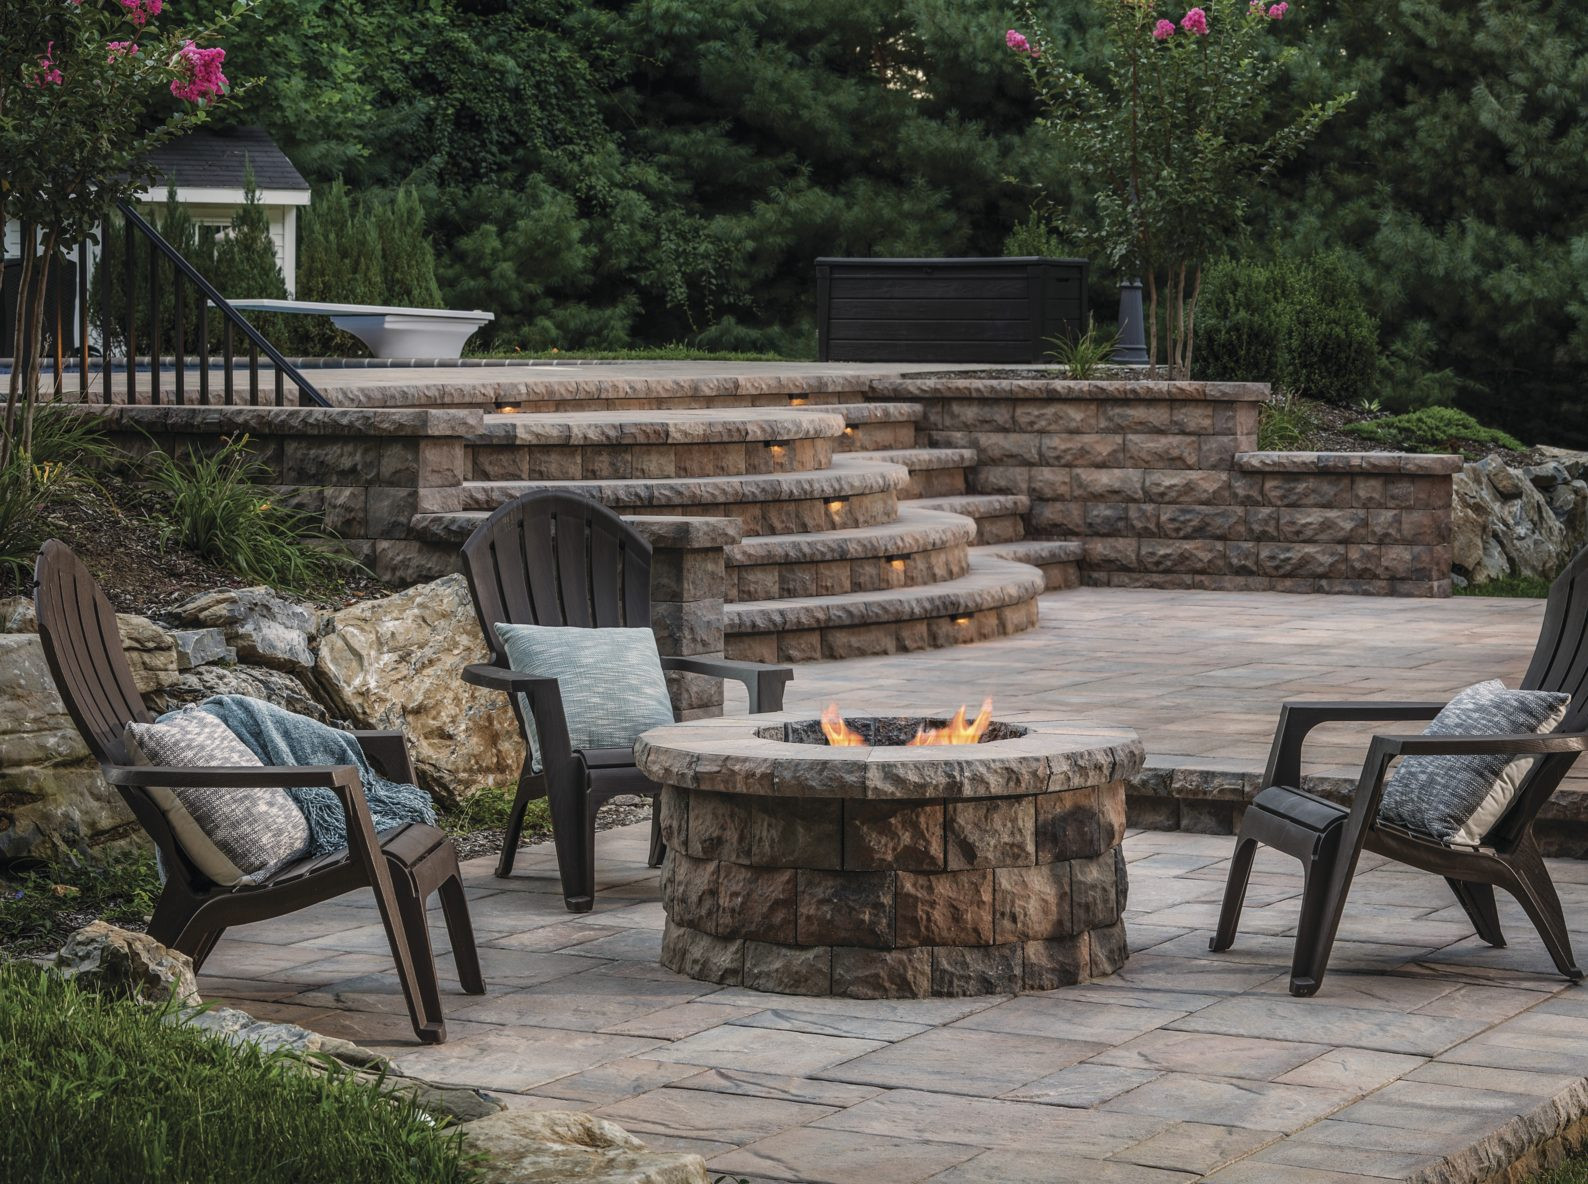 Outdoor Fire Pit Patio
 Turn Up the Heat with These Cozy Fire Pit Patio Design